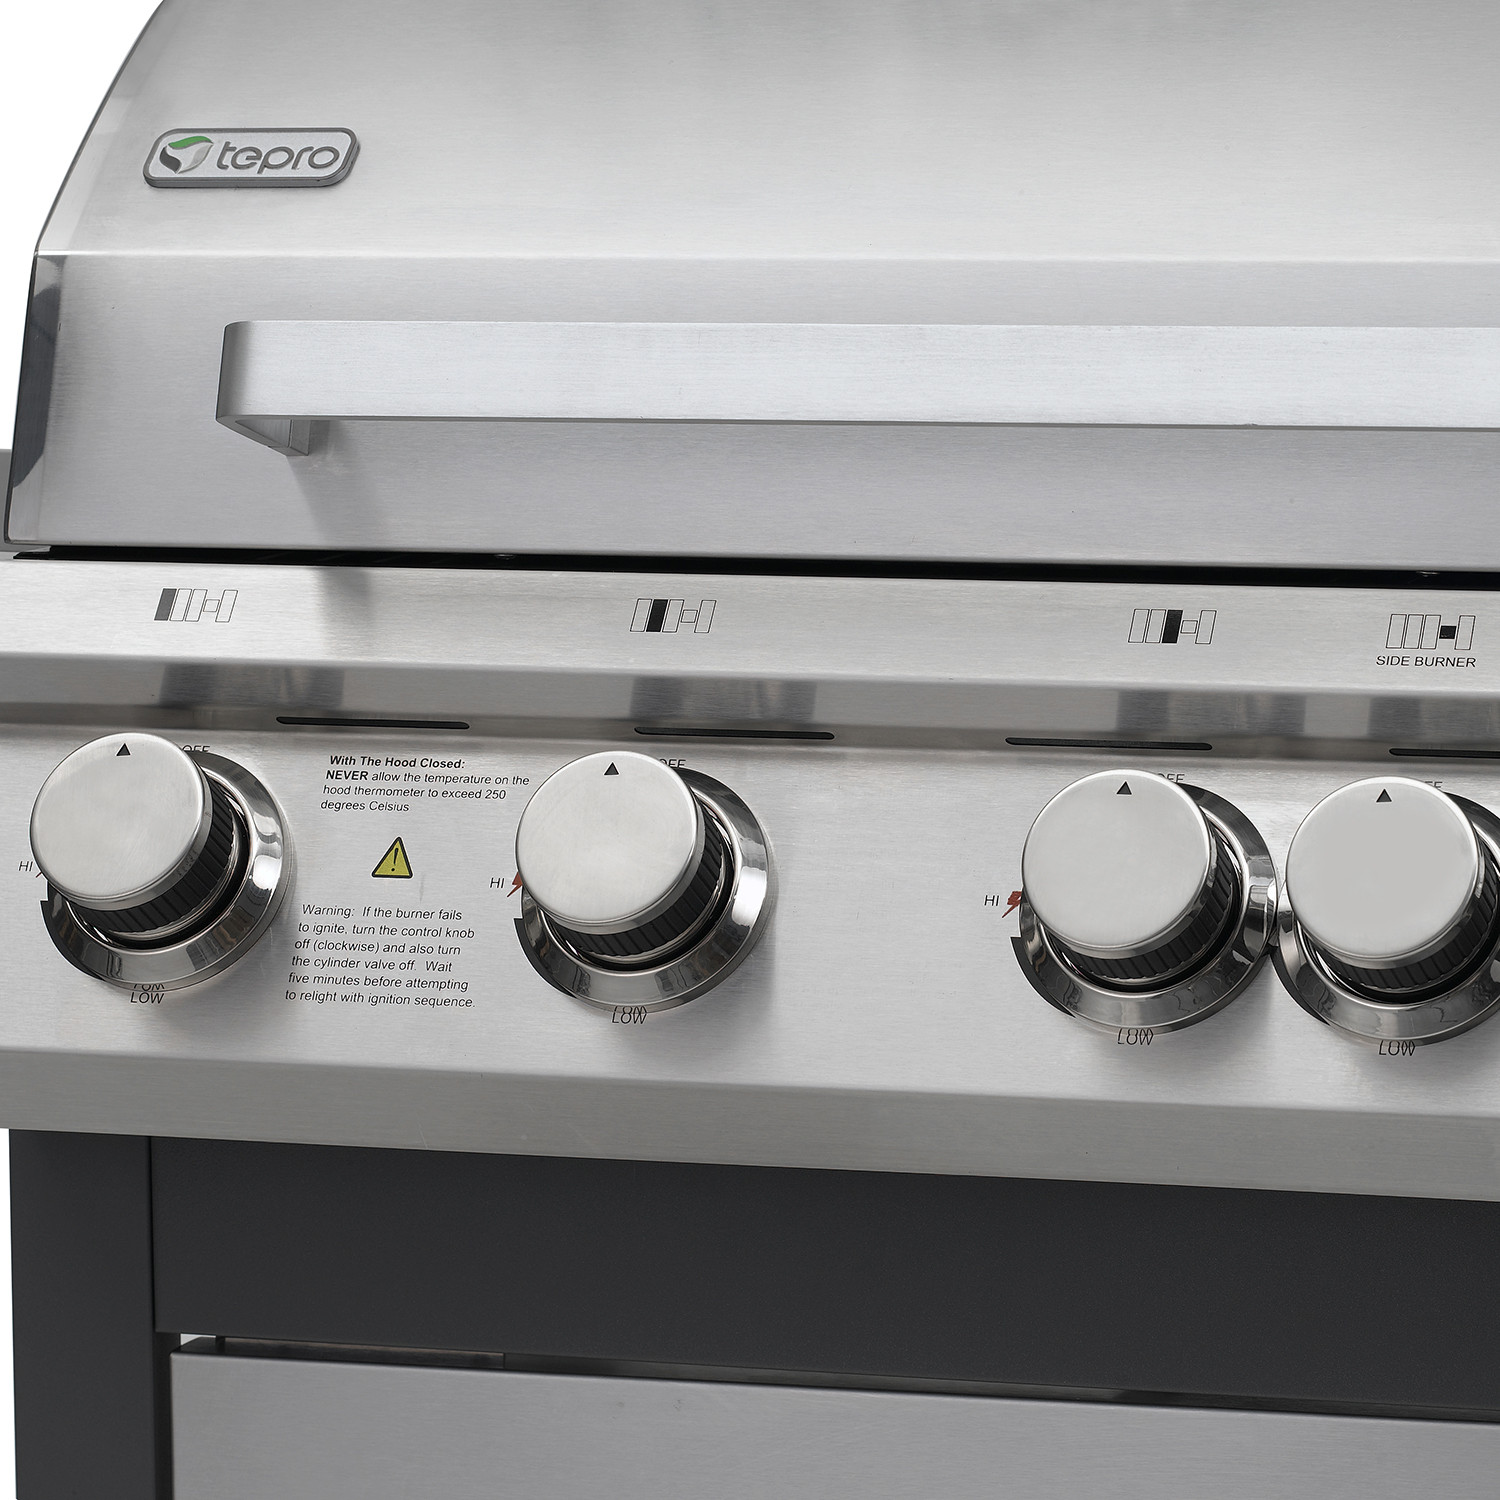 Rockland Gas Grill BBQ Image 4